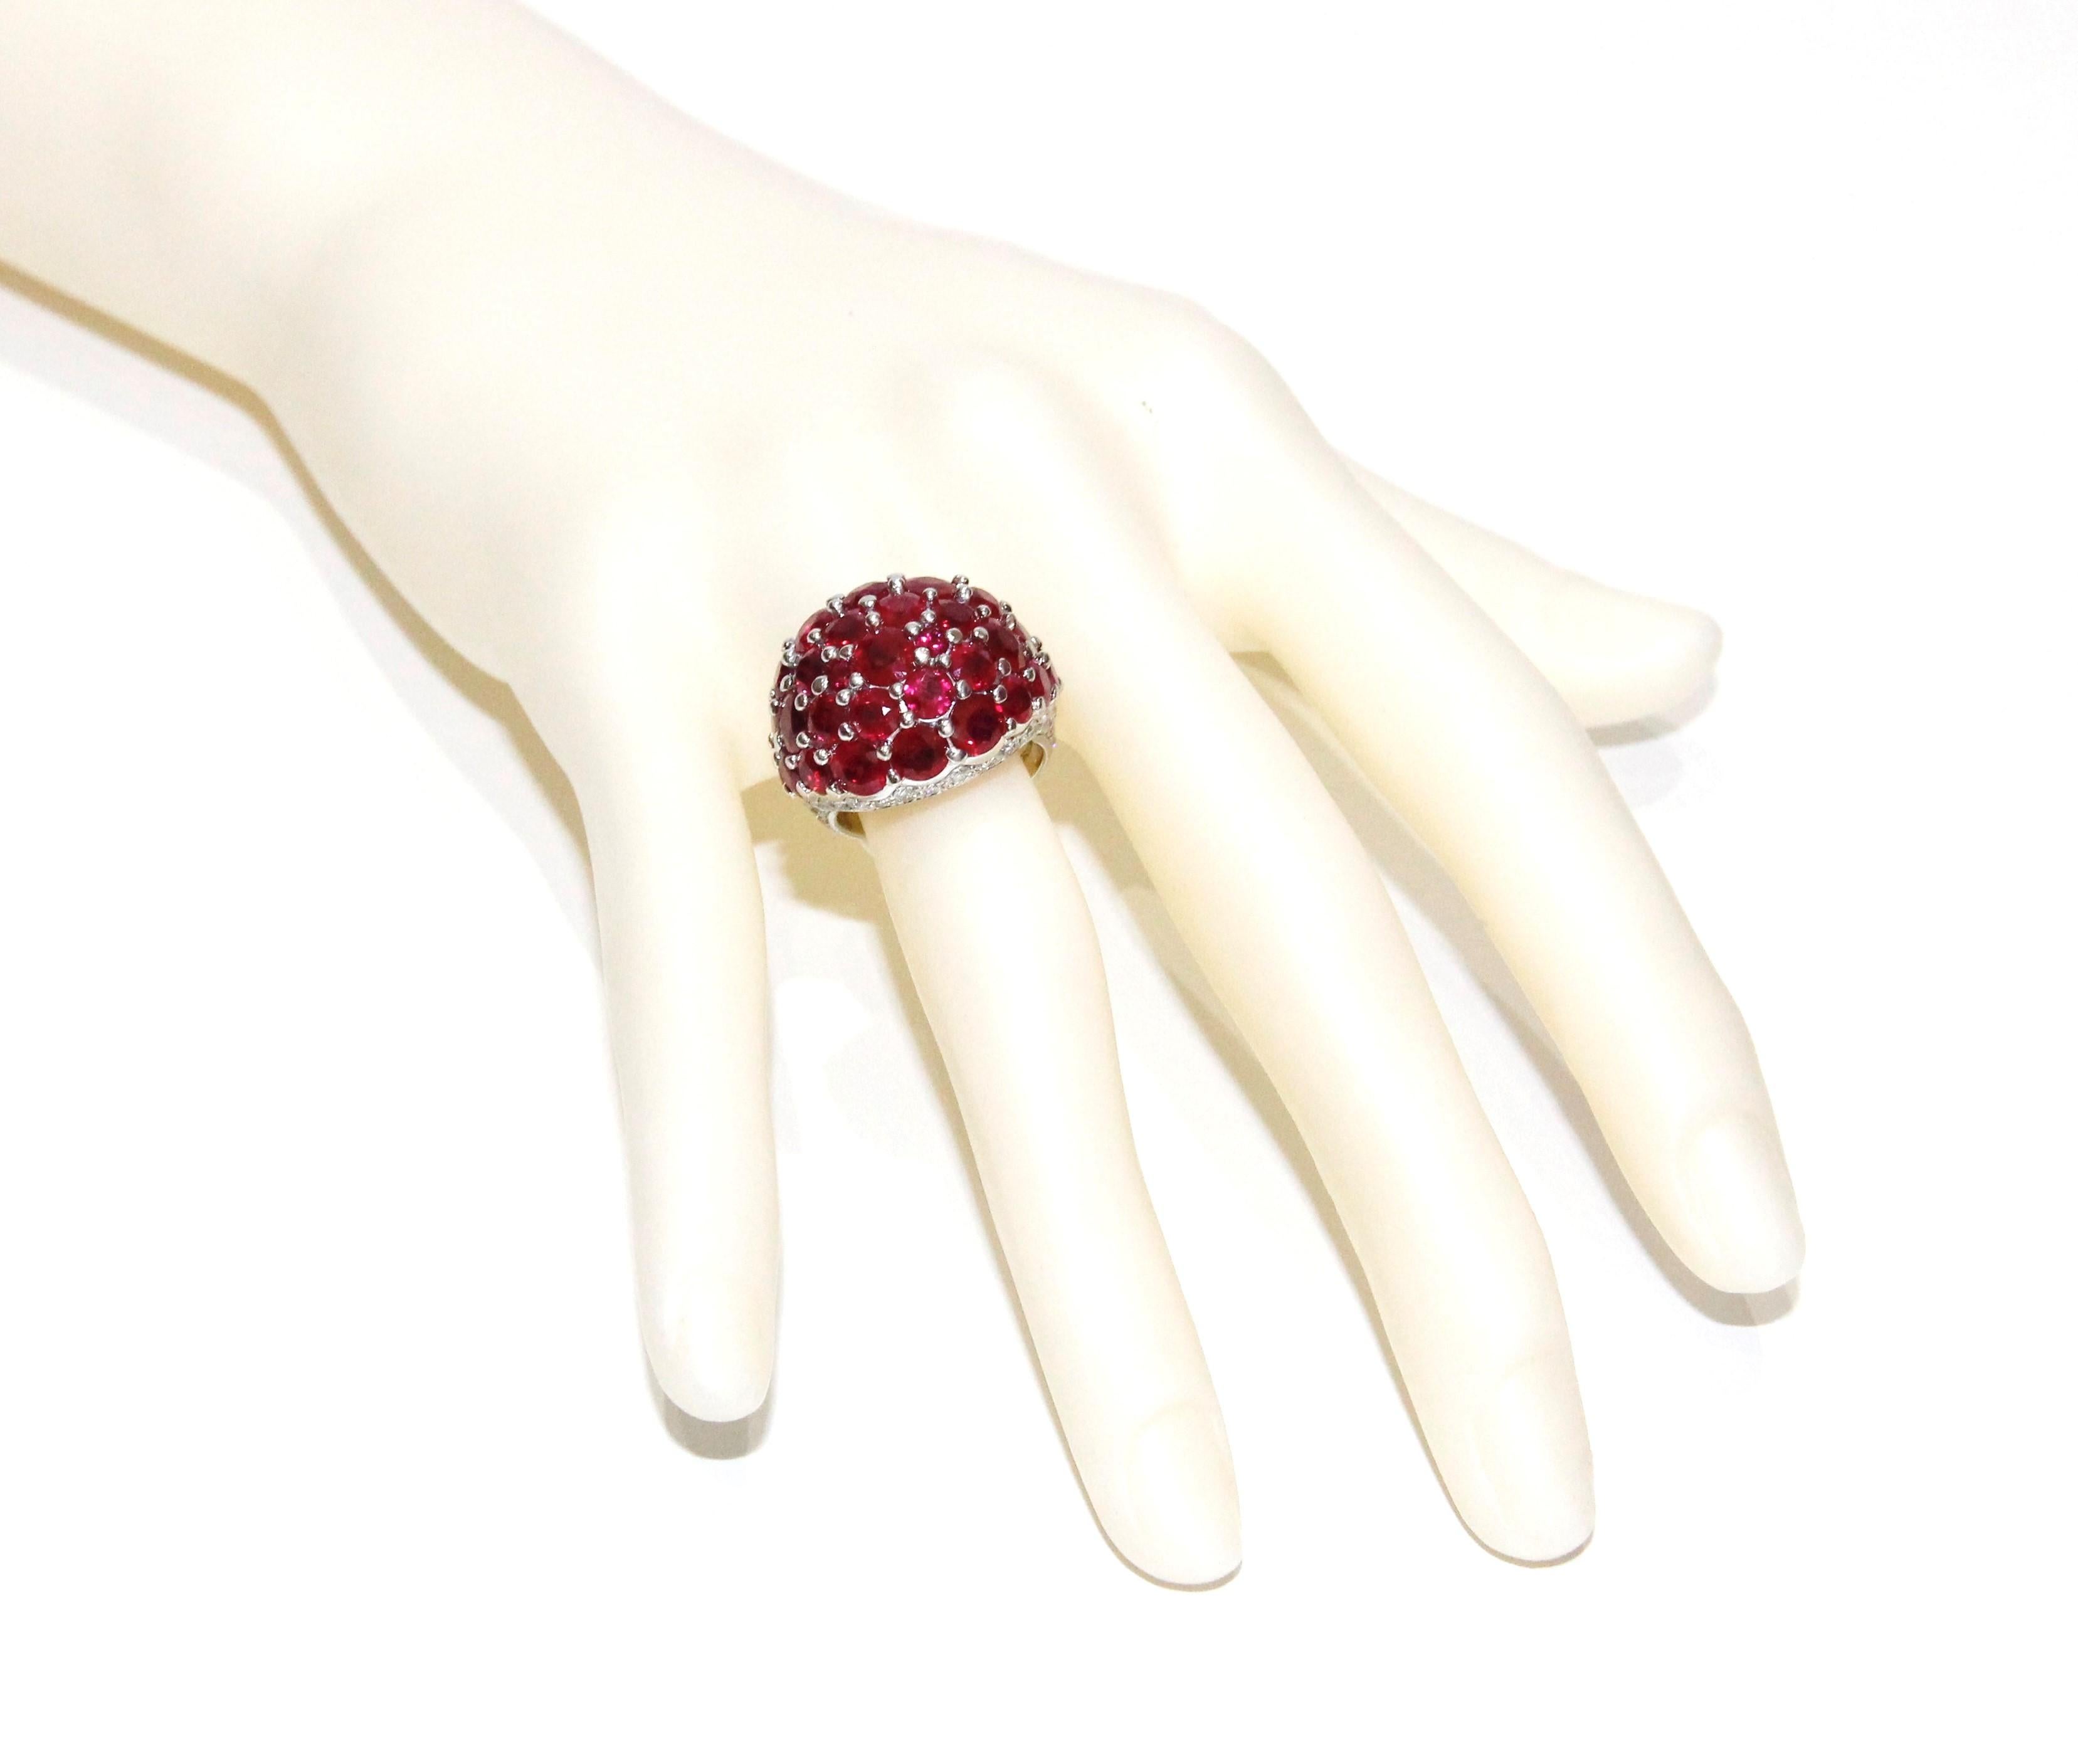 Graff 18K White Gold Burma Ruby ring.
Comes with original Box and Appraisal From Graff
 Burma Ruby 19.23ctw
White Diamonds 2.38ctw
Retail $150,000.00